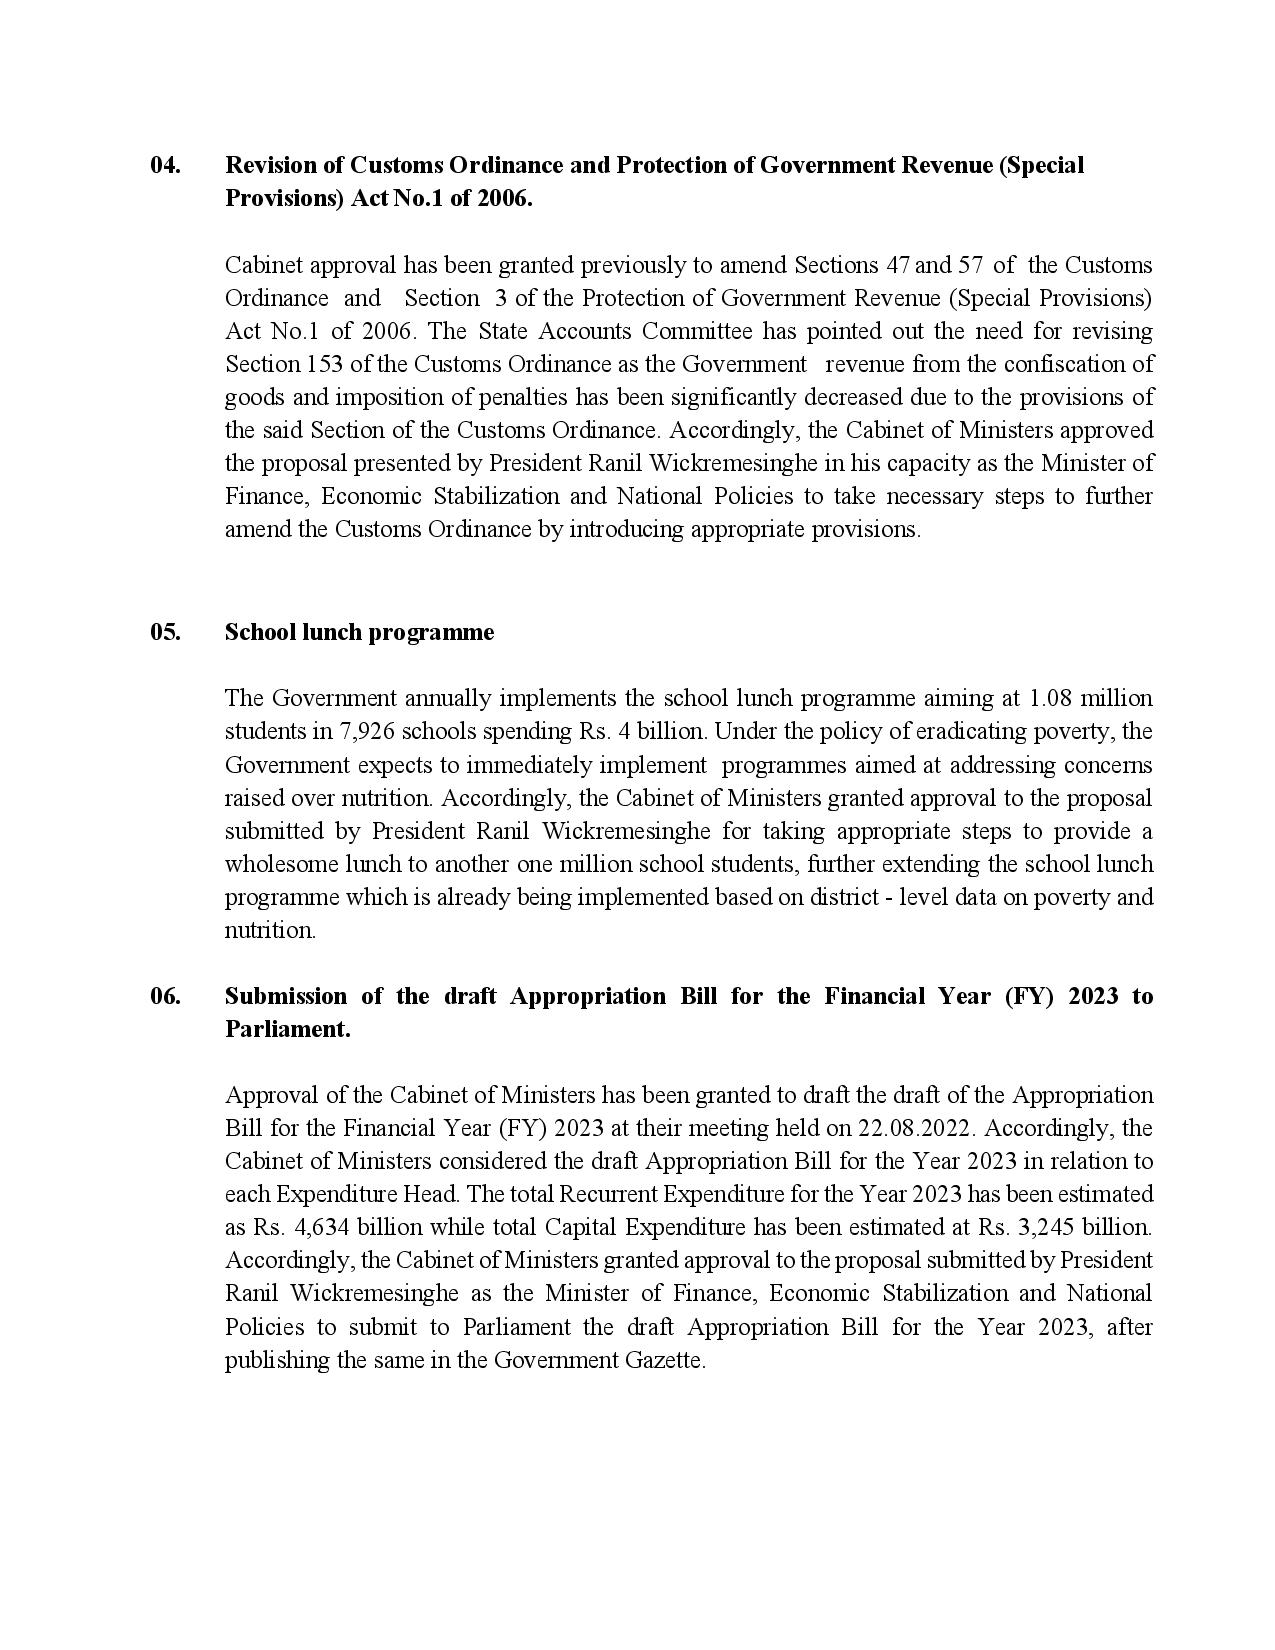 Cabinet Decision on 03.10.2022 English page 002